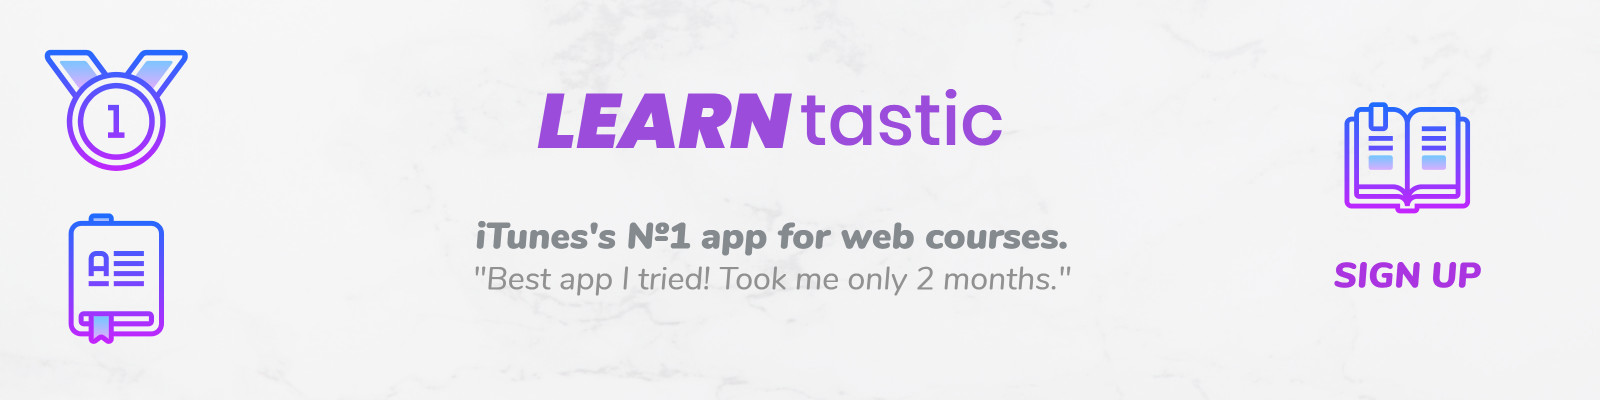 Learntastic - App for web courses